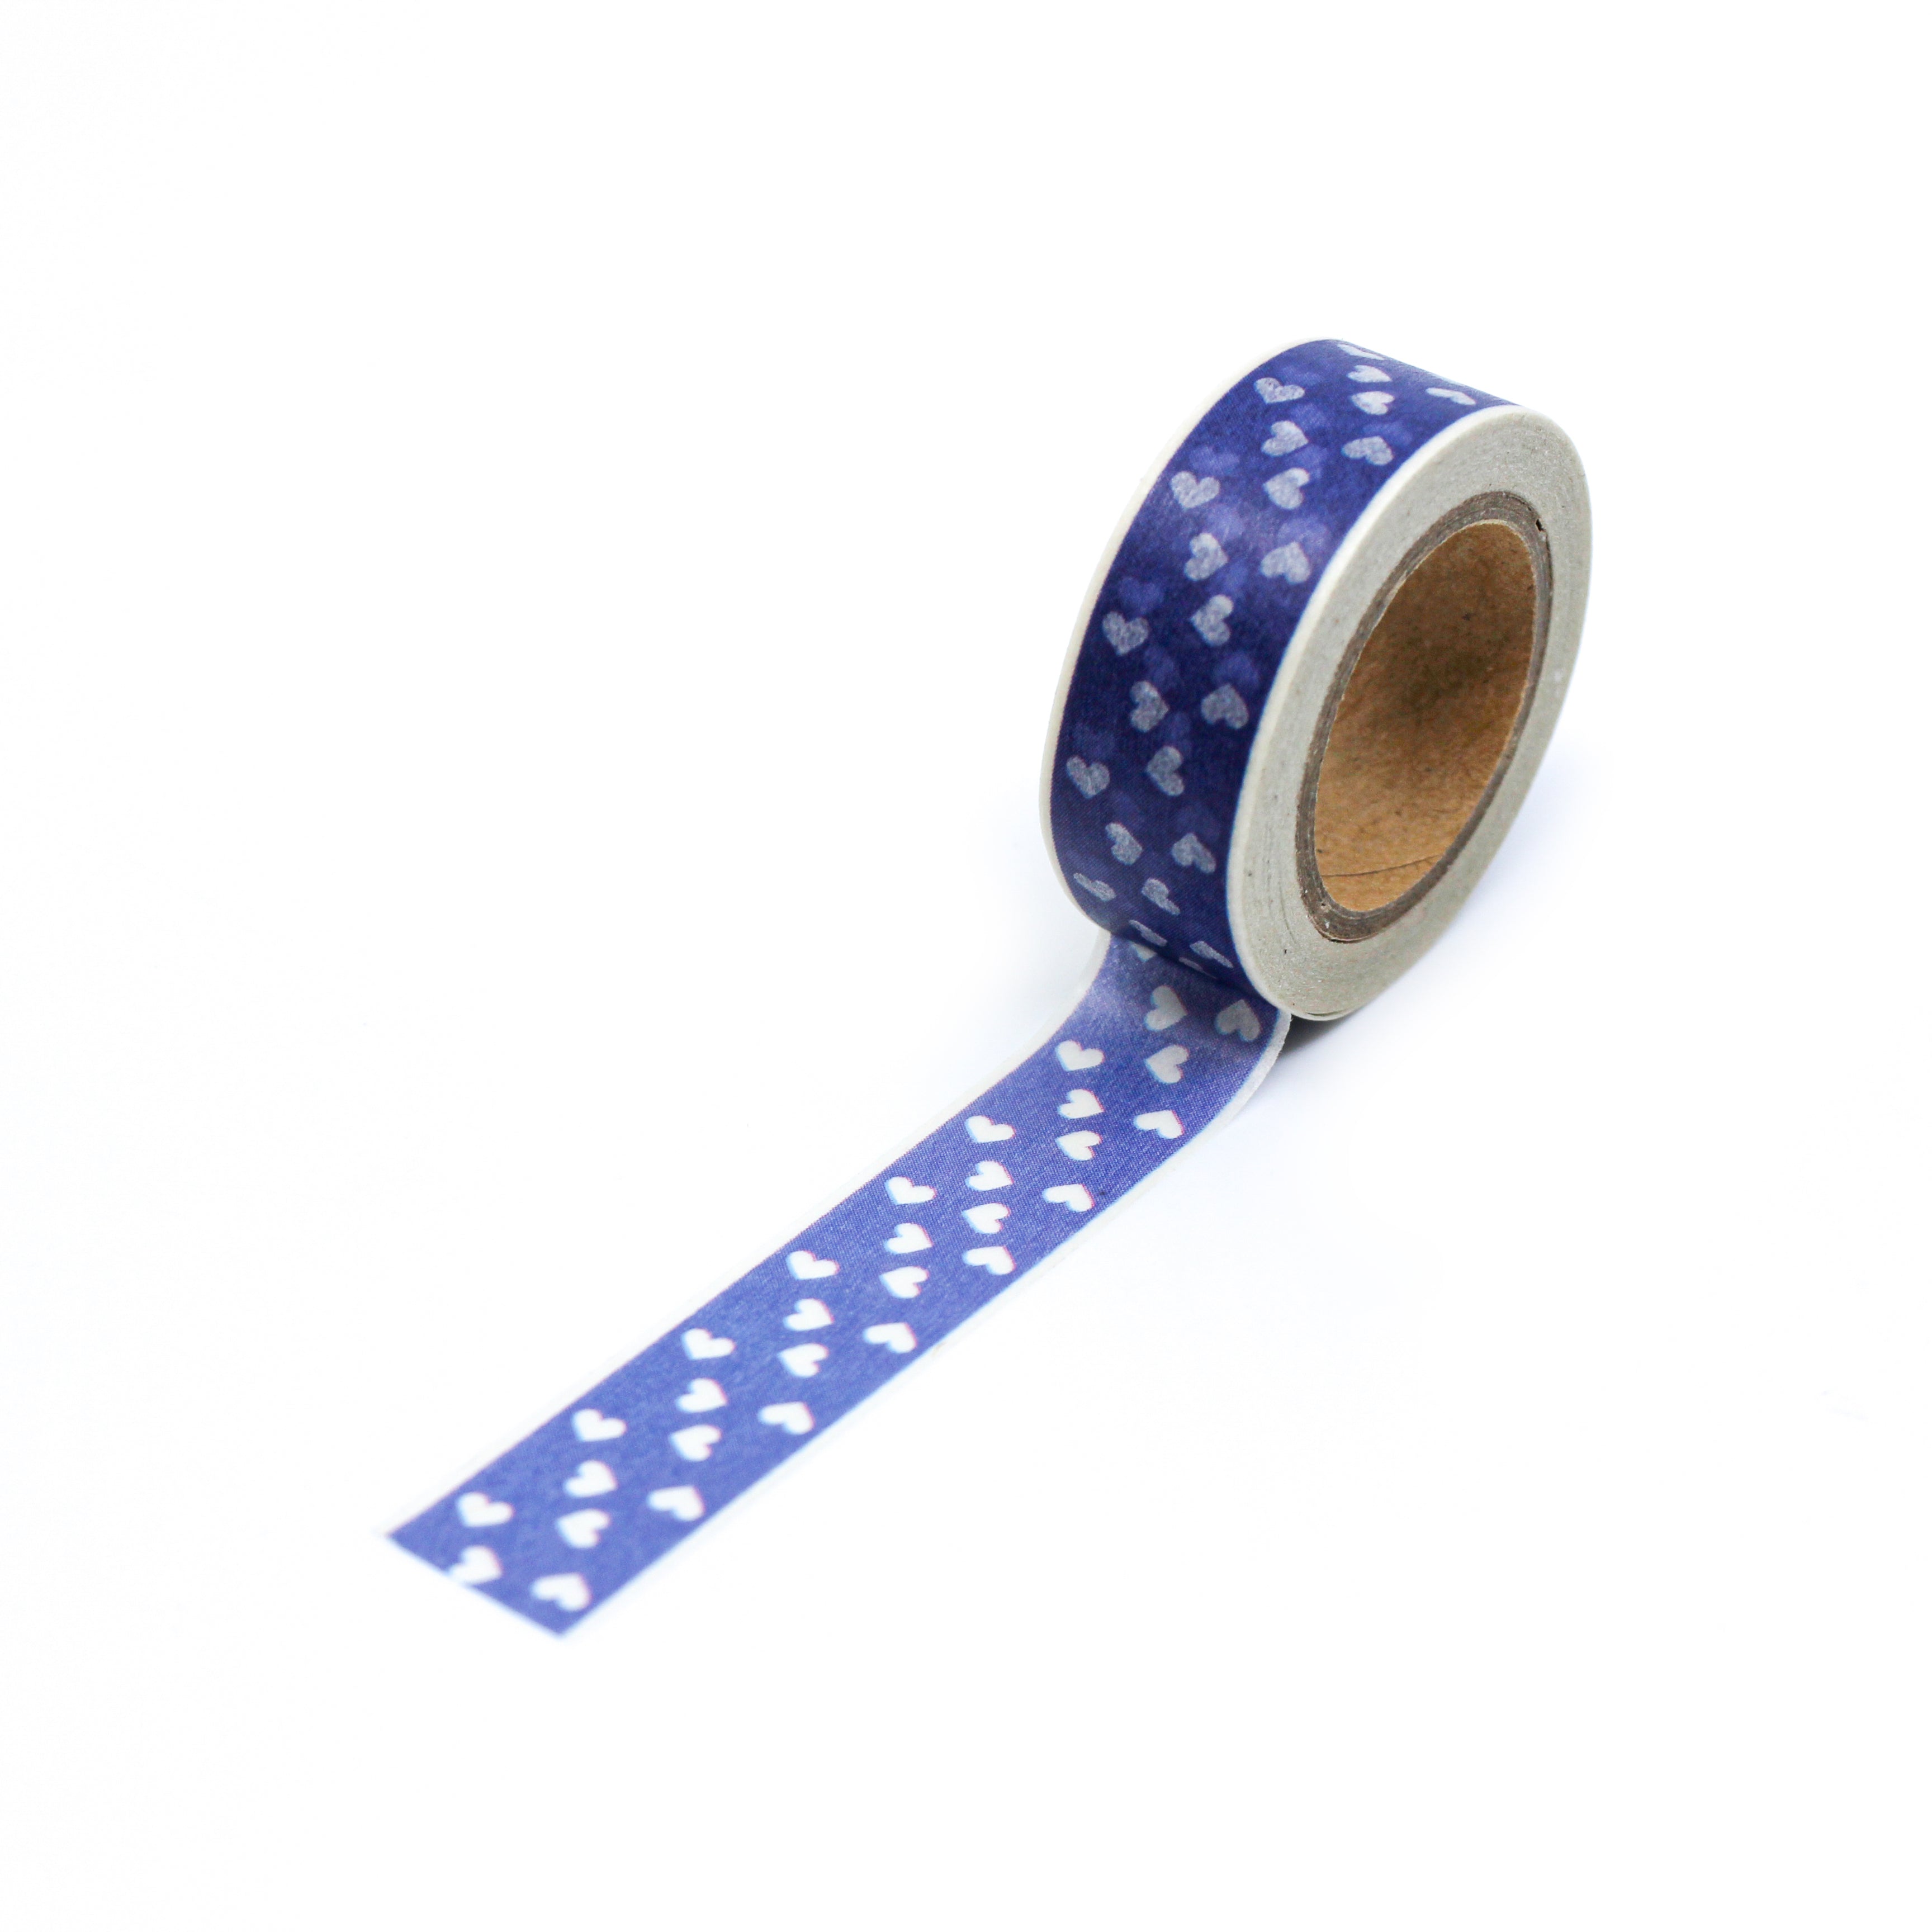 This is a full pattern repeat view of blue multi hearts washi tape BBB Supplies Craft Shop